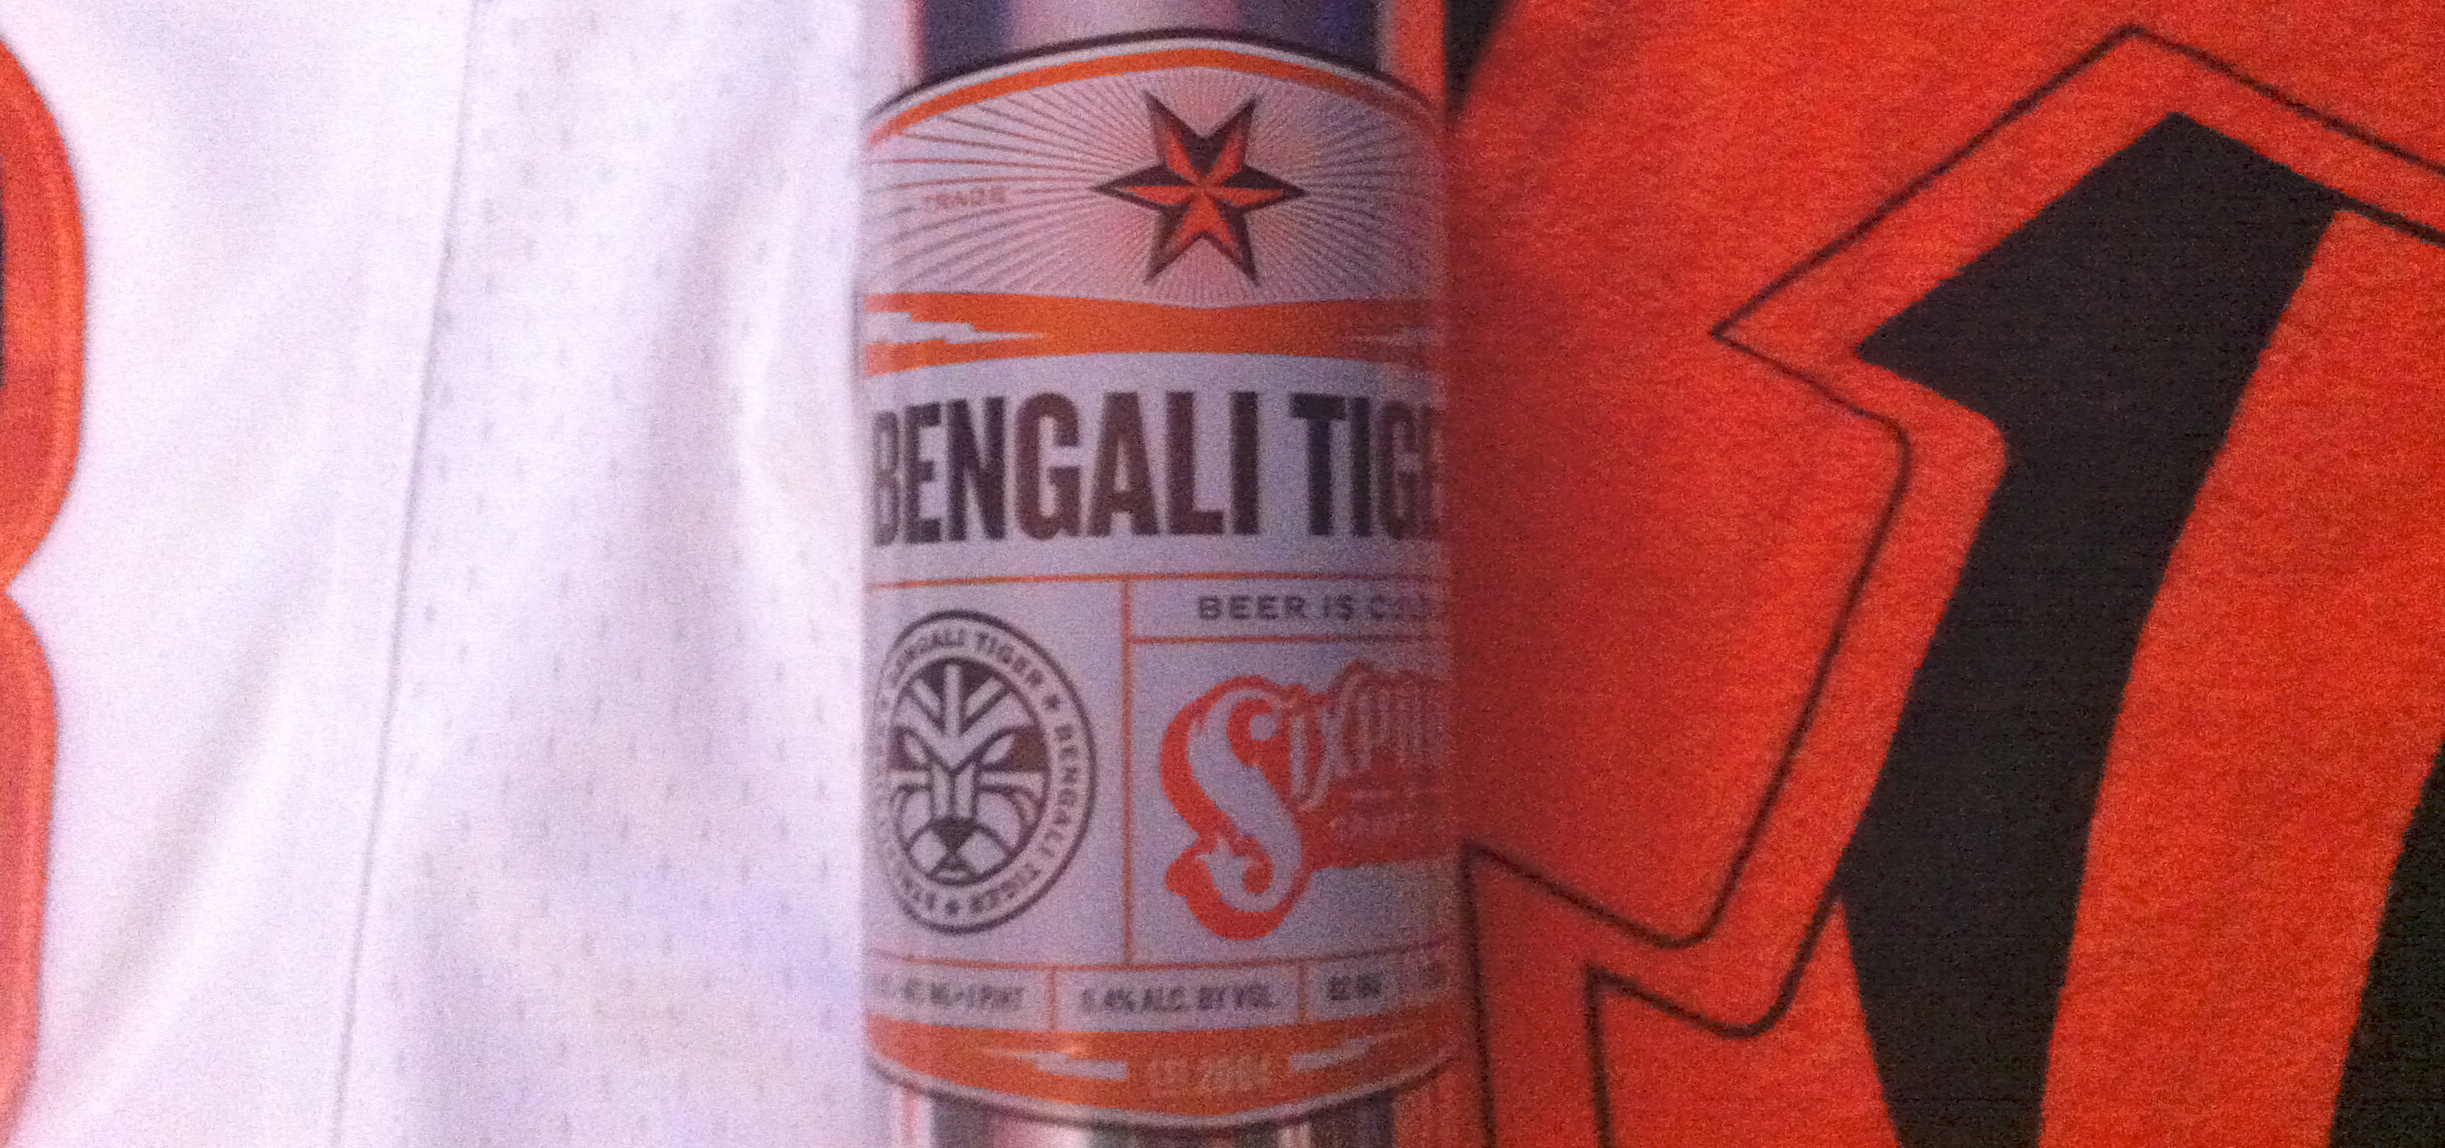 Sixpoint Brewery – Bengali Tiger